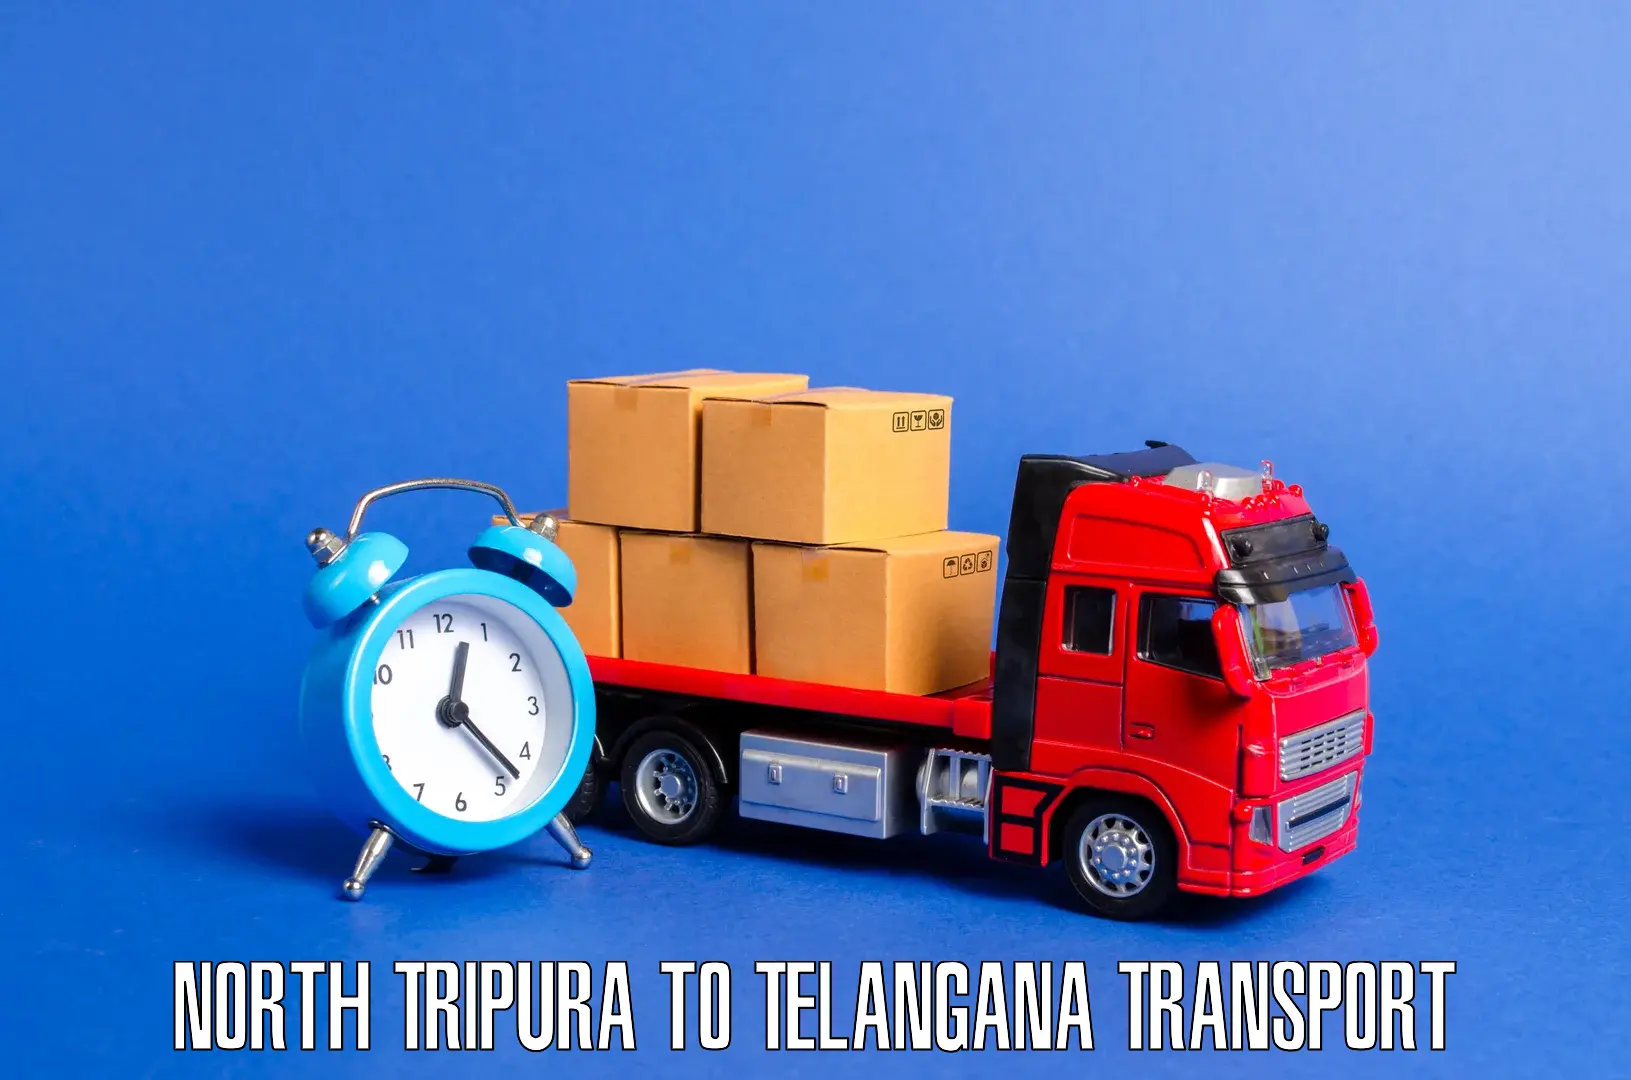 Container transportation services in North Tripura to Chegunta